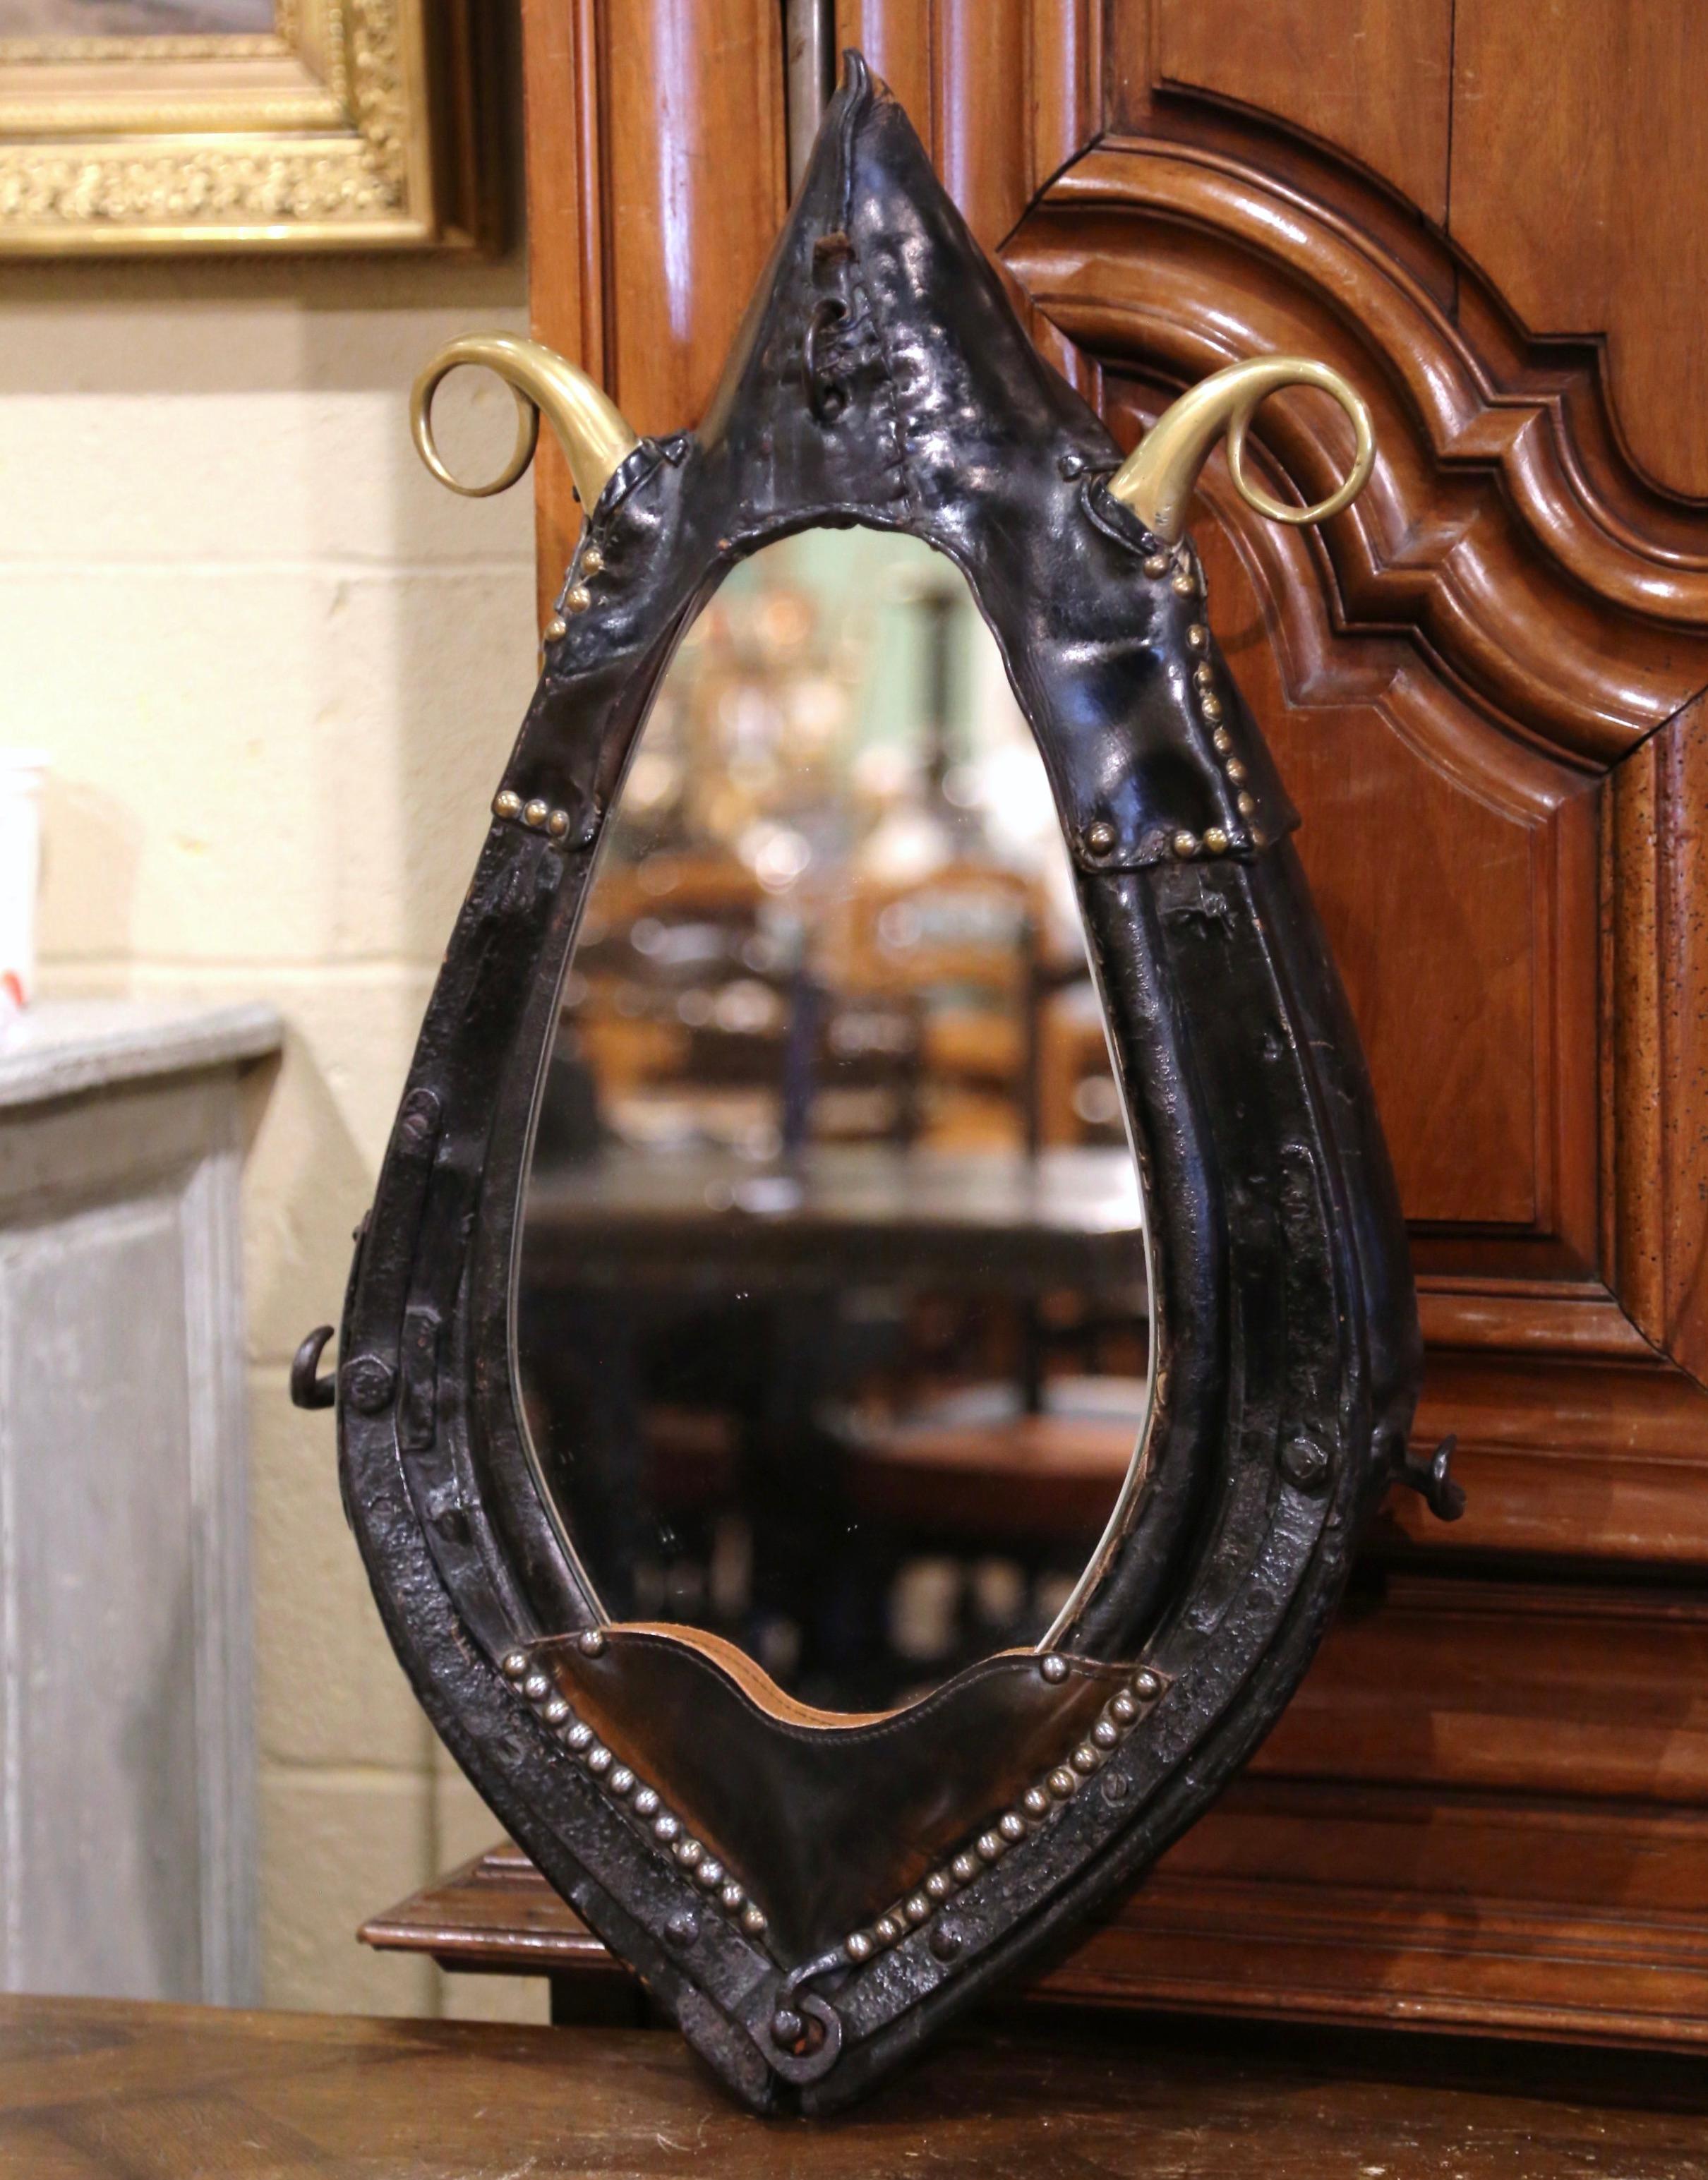 The wall hanging mirror is a unique find for a ranch home or hunting lodge. The mirror is framed by a fine, antique horse collar from France, circa 1880. The collar is carved in wood and covered with leather and original iron and bronze hooks. This